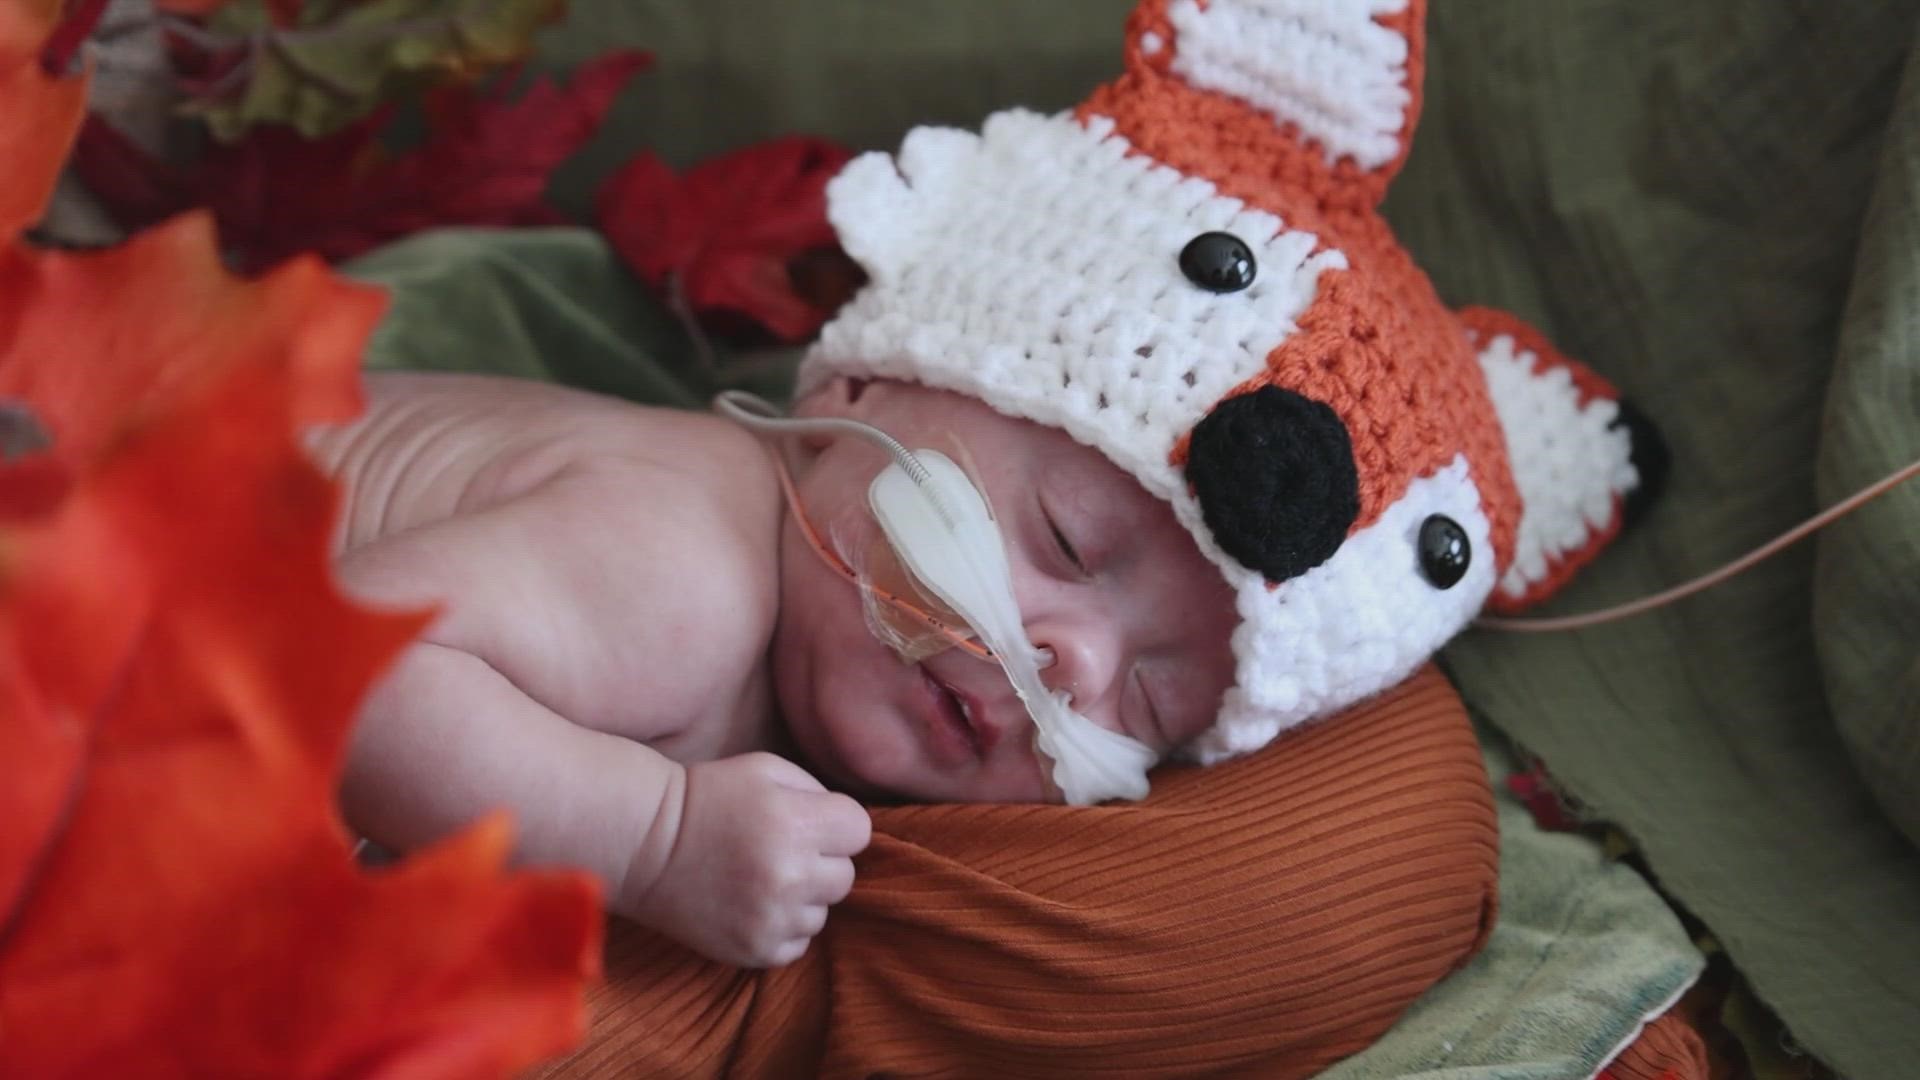 The NICU babies at St. David's Women's Center of Texas celebrated their first Halloween Sunday and were dressed up in costumes for the occasion. Video: St. David's.